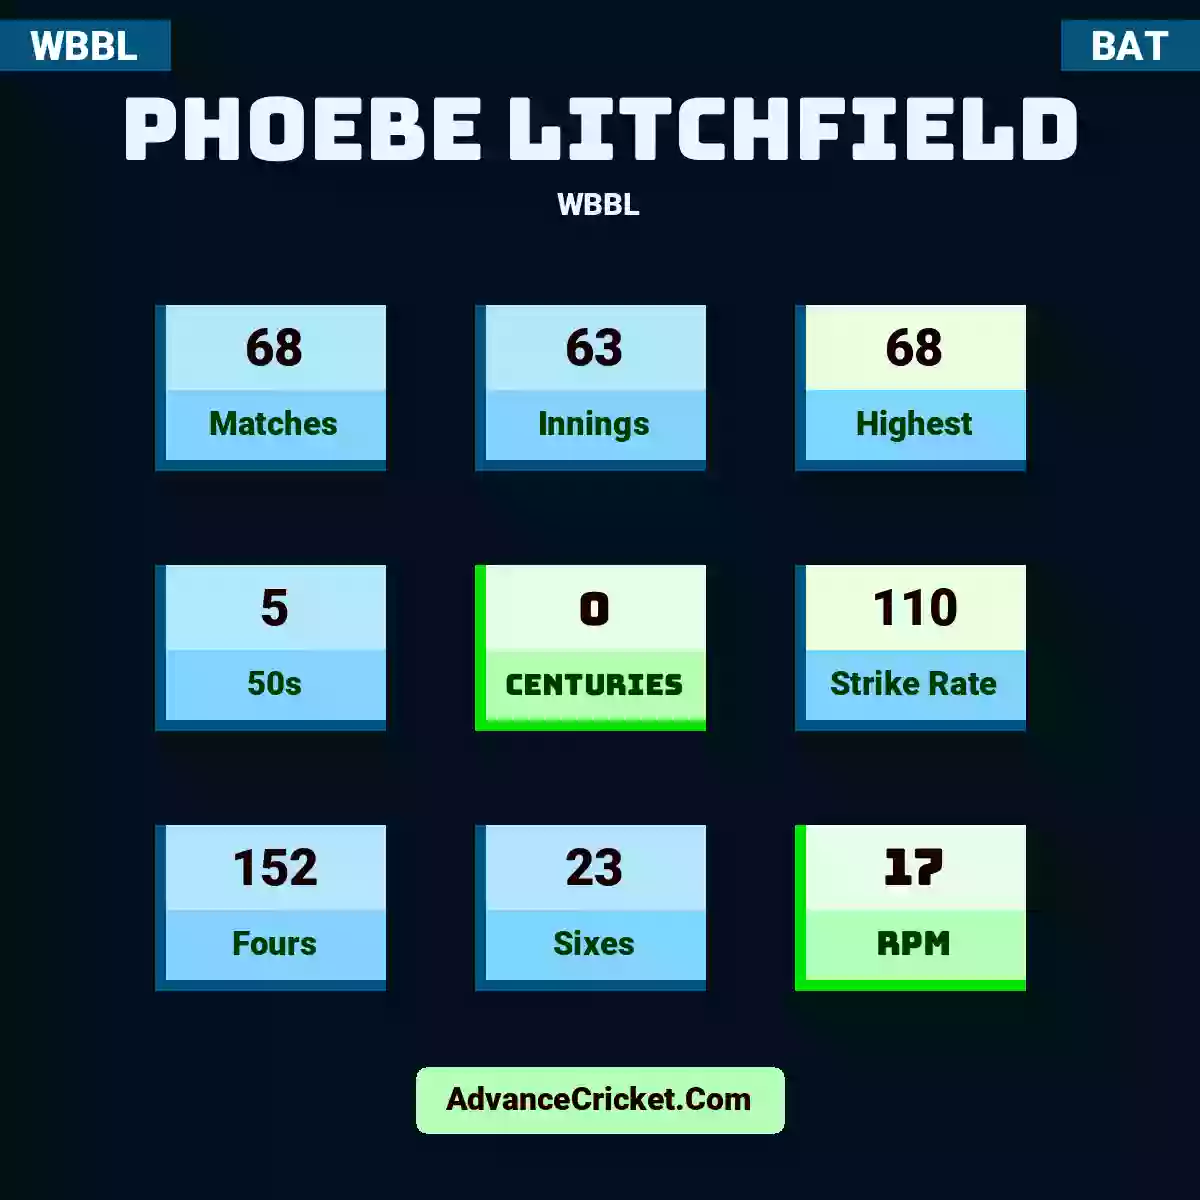 Phoebe Litchfield WBBL , Phoebe Litchfield played 68 matches, scored 68 runs as highest, 5 half-centuries, and 0 centuries, with a strike rate of 110. P.Litchfield hit 152 fours and 23 sixes, with an RPM of 17.